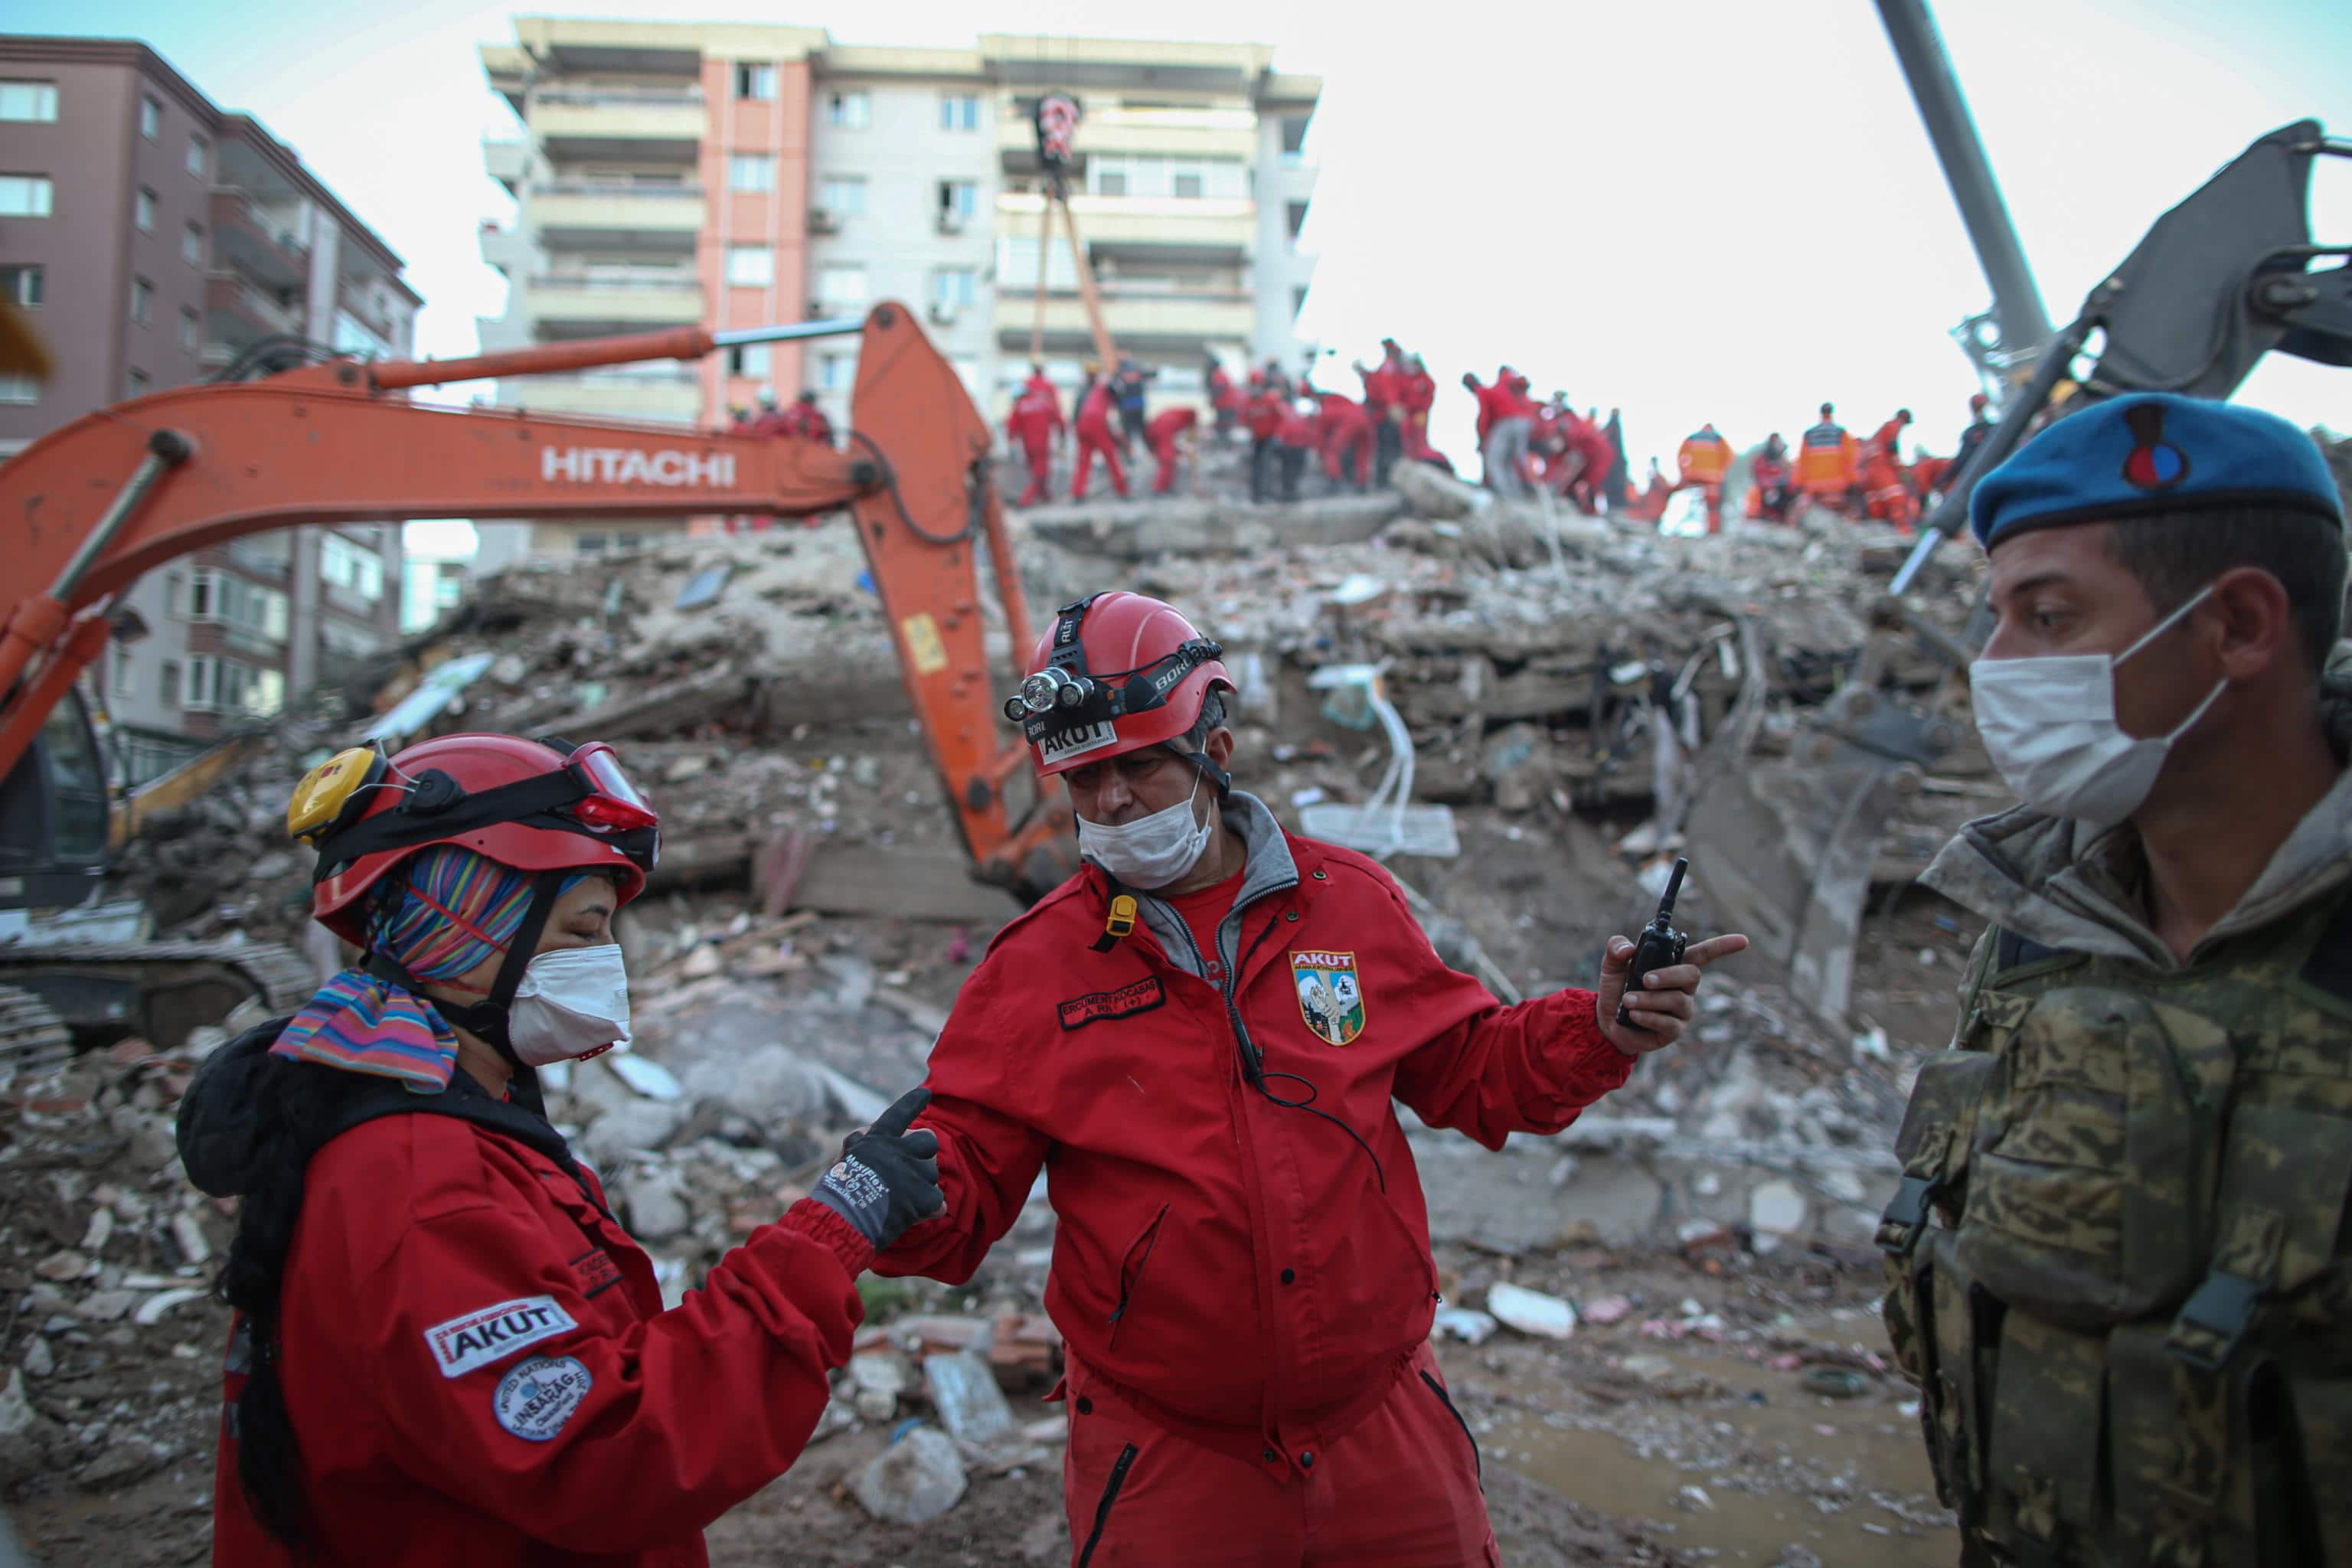 epa08790340 Rescue workers and people search for survivors at the site of a collapsed building after a 7.0 magnitude earthquake, originating in the Aegean Sea, hit the area in Izmir, Turkey, 01 November 2020. According to media reports, at least 49 people have died and more than 800 have been injured during the earthquake.  EPA/ERDEM SAHIN